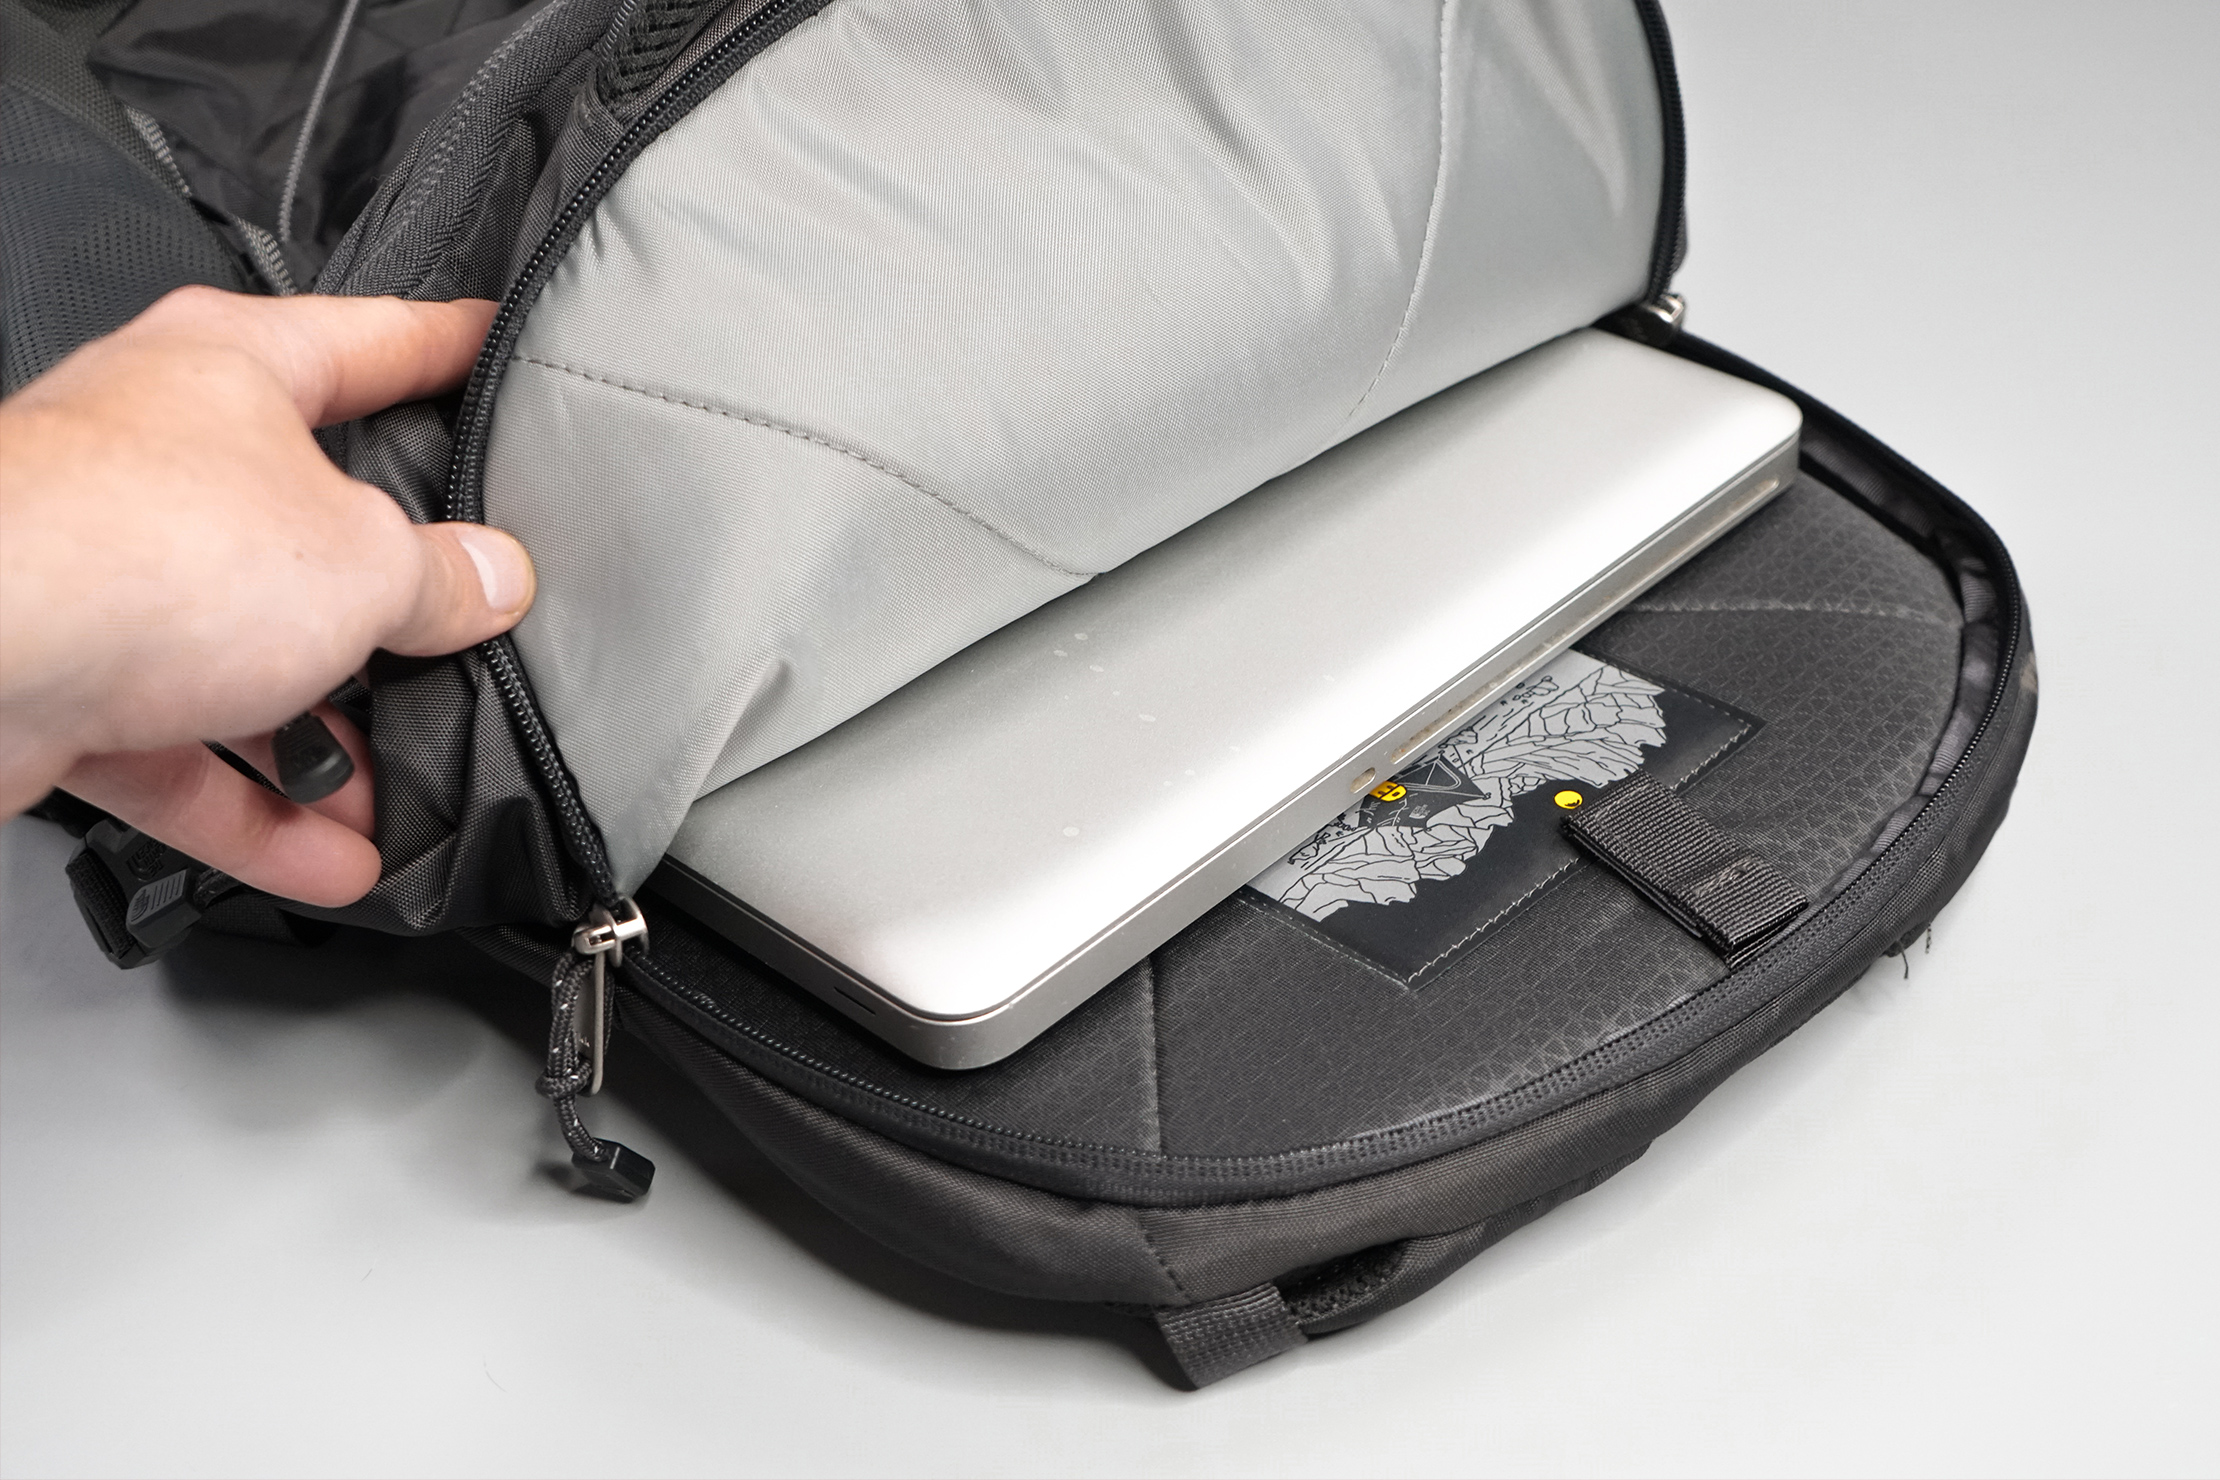 The North Face Borealis Backpack Laptop Compartment